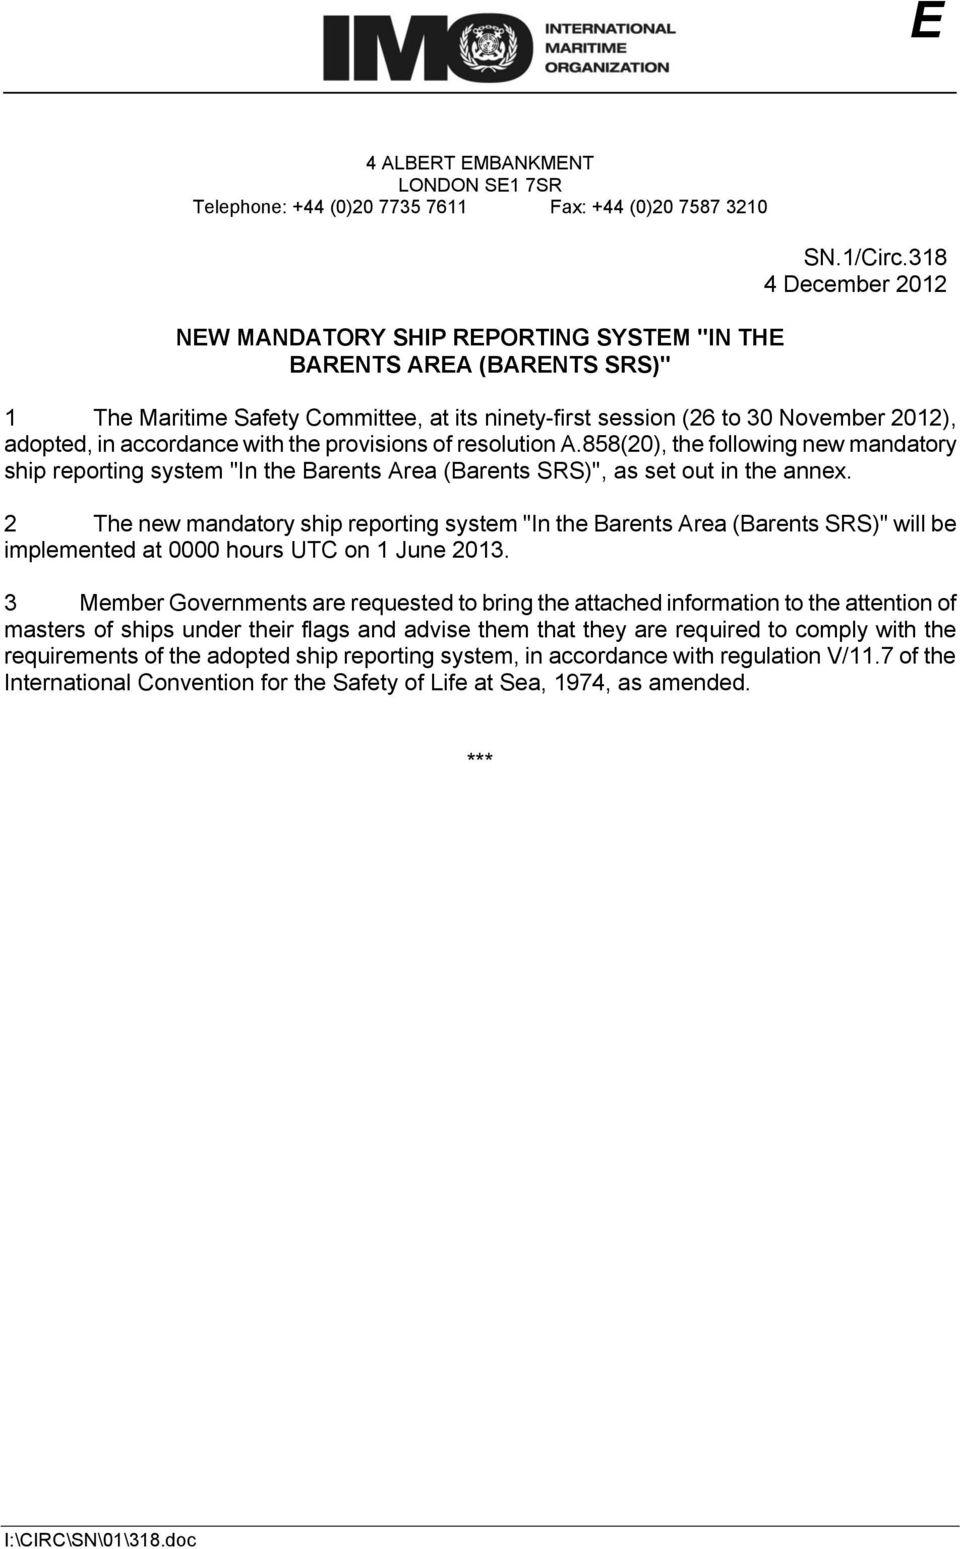 858(20), the following new mandatory ship reporting system "In the Barents Area (Barents SRS)", as set out in the annex.